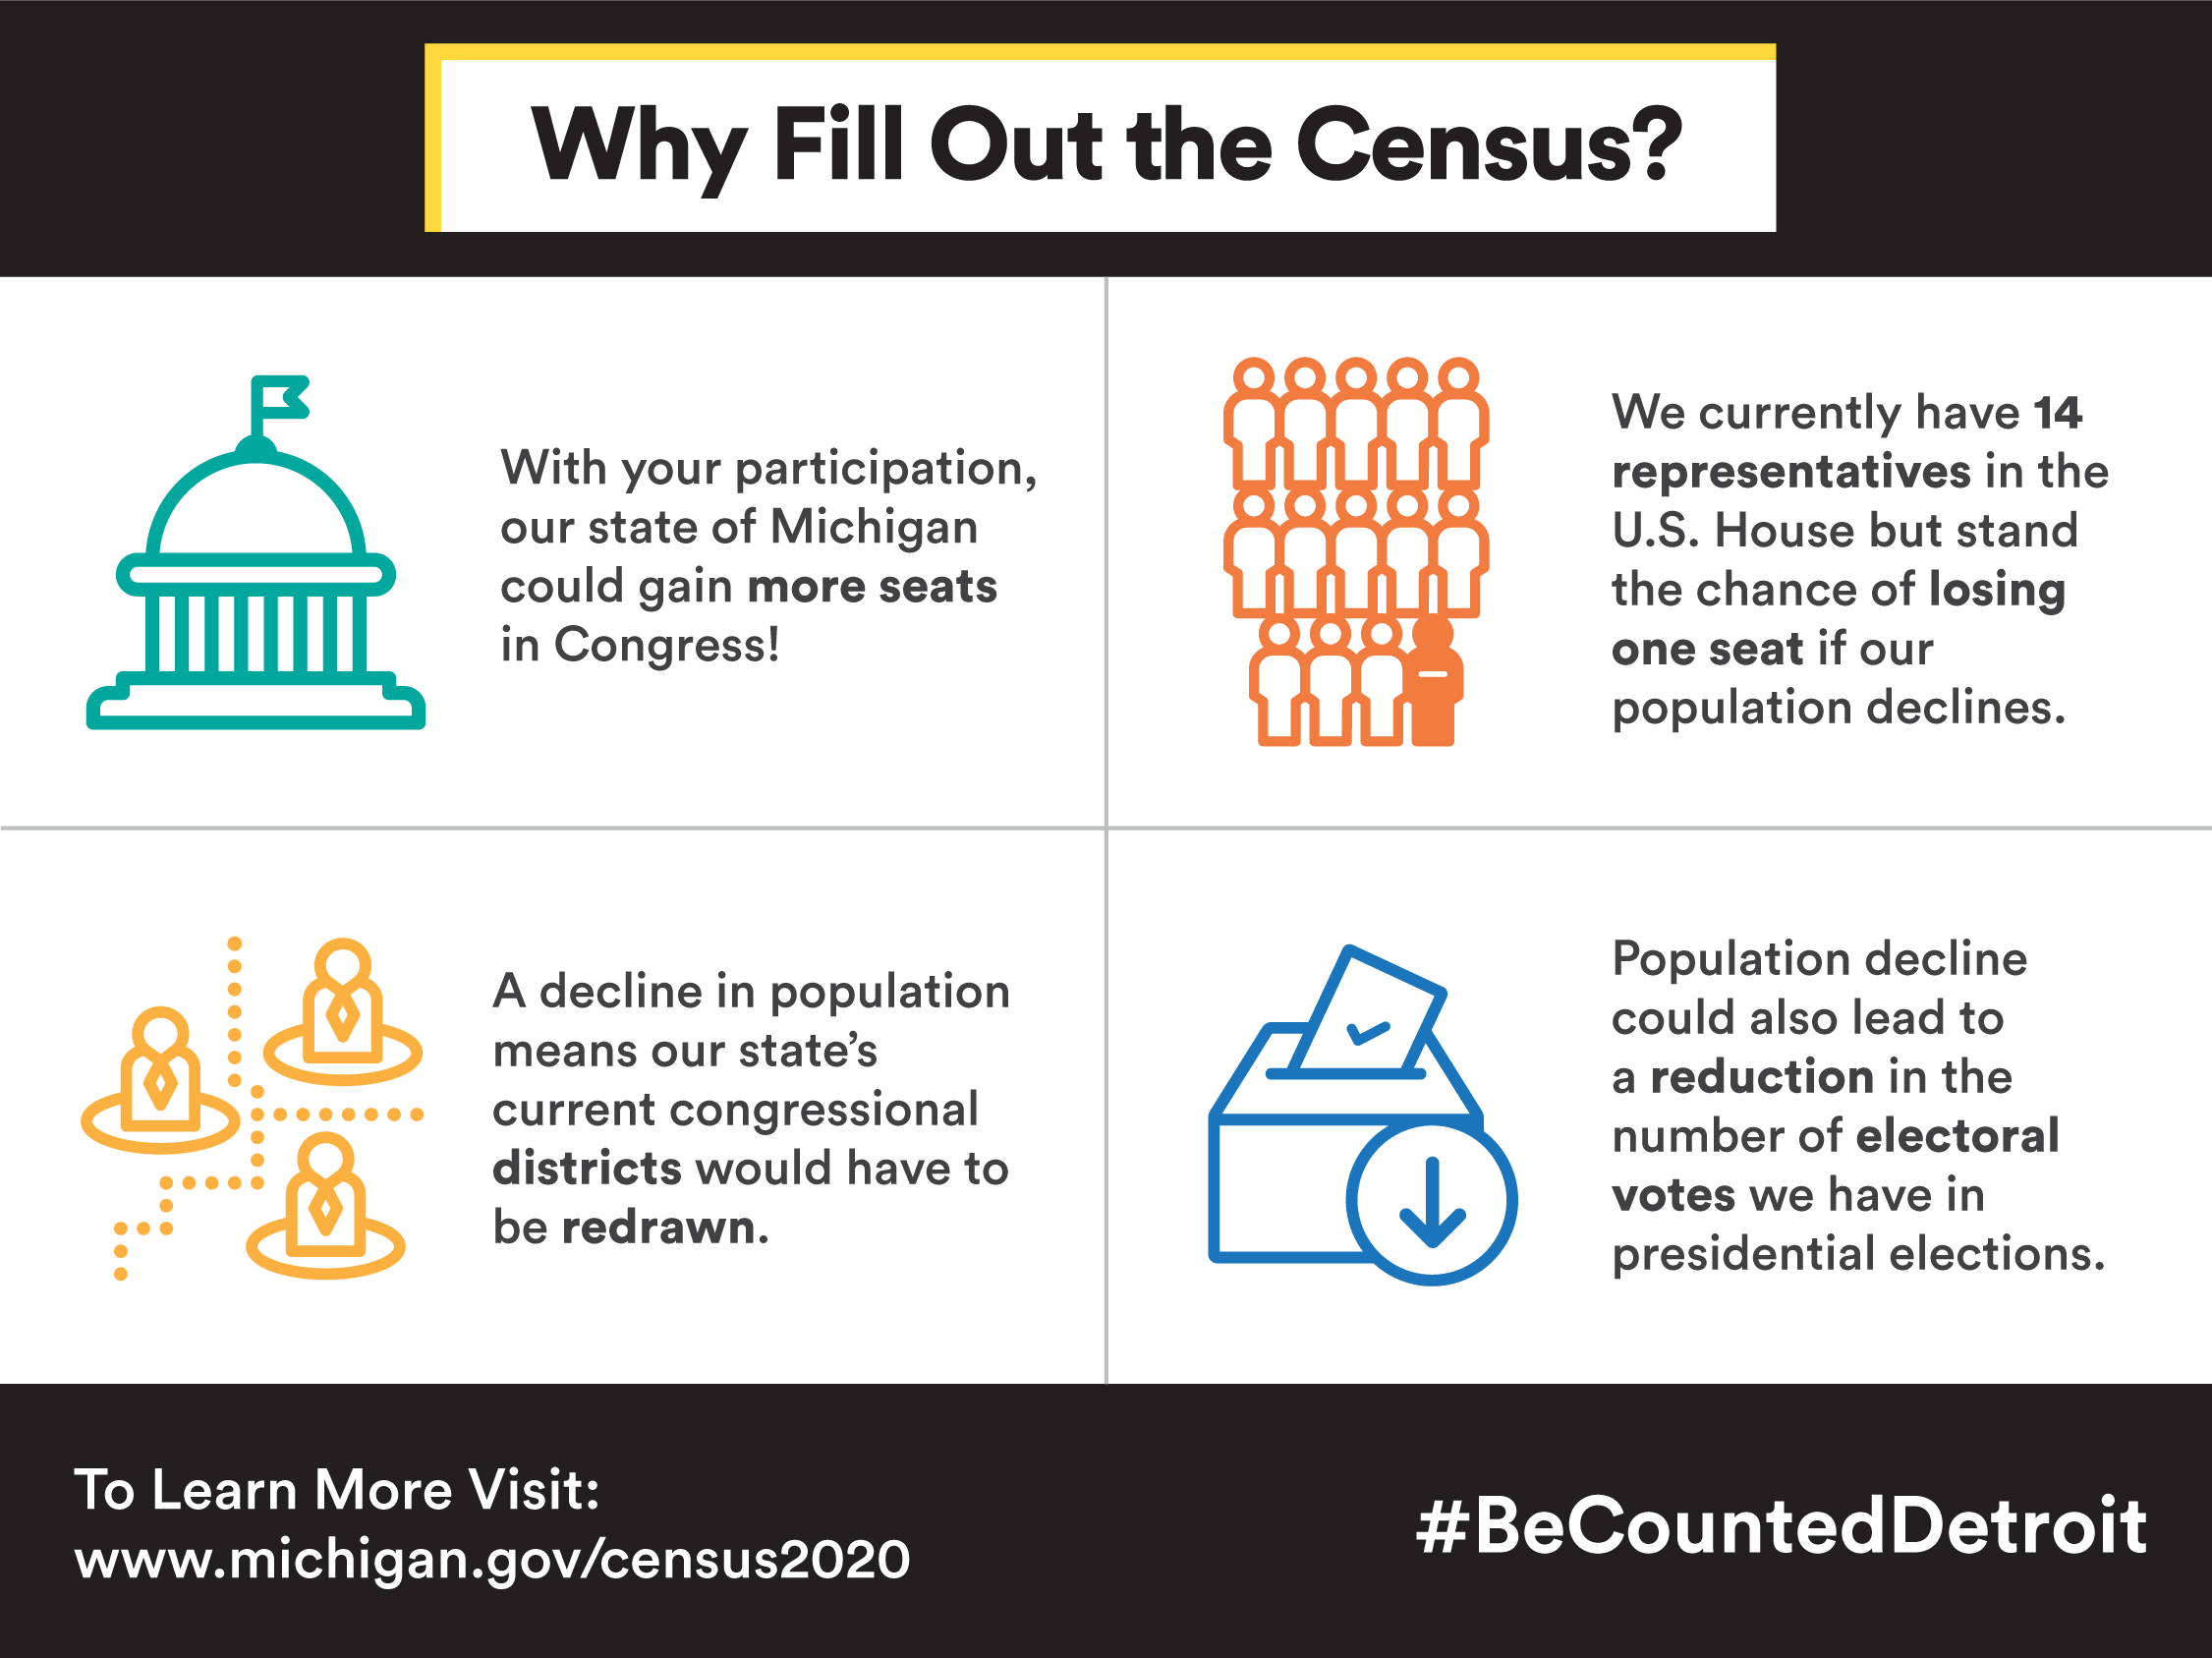 WHY FILL OUT THE 2020 CENSUS?